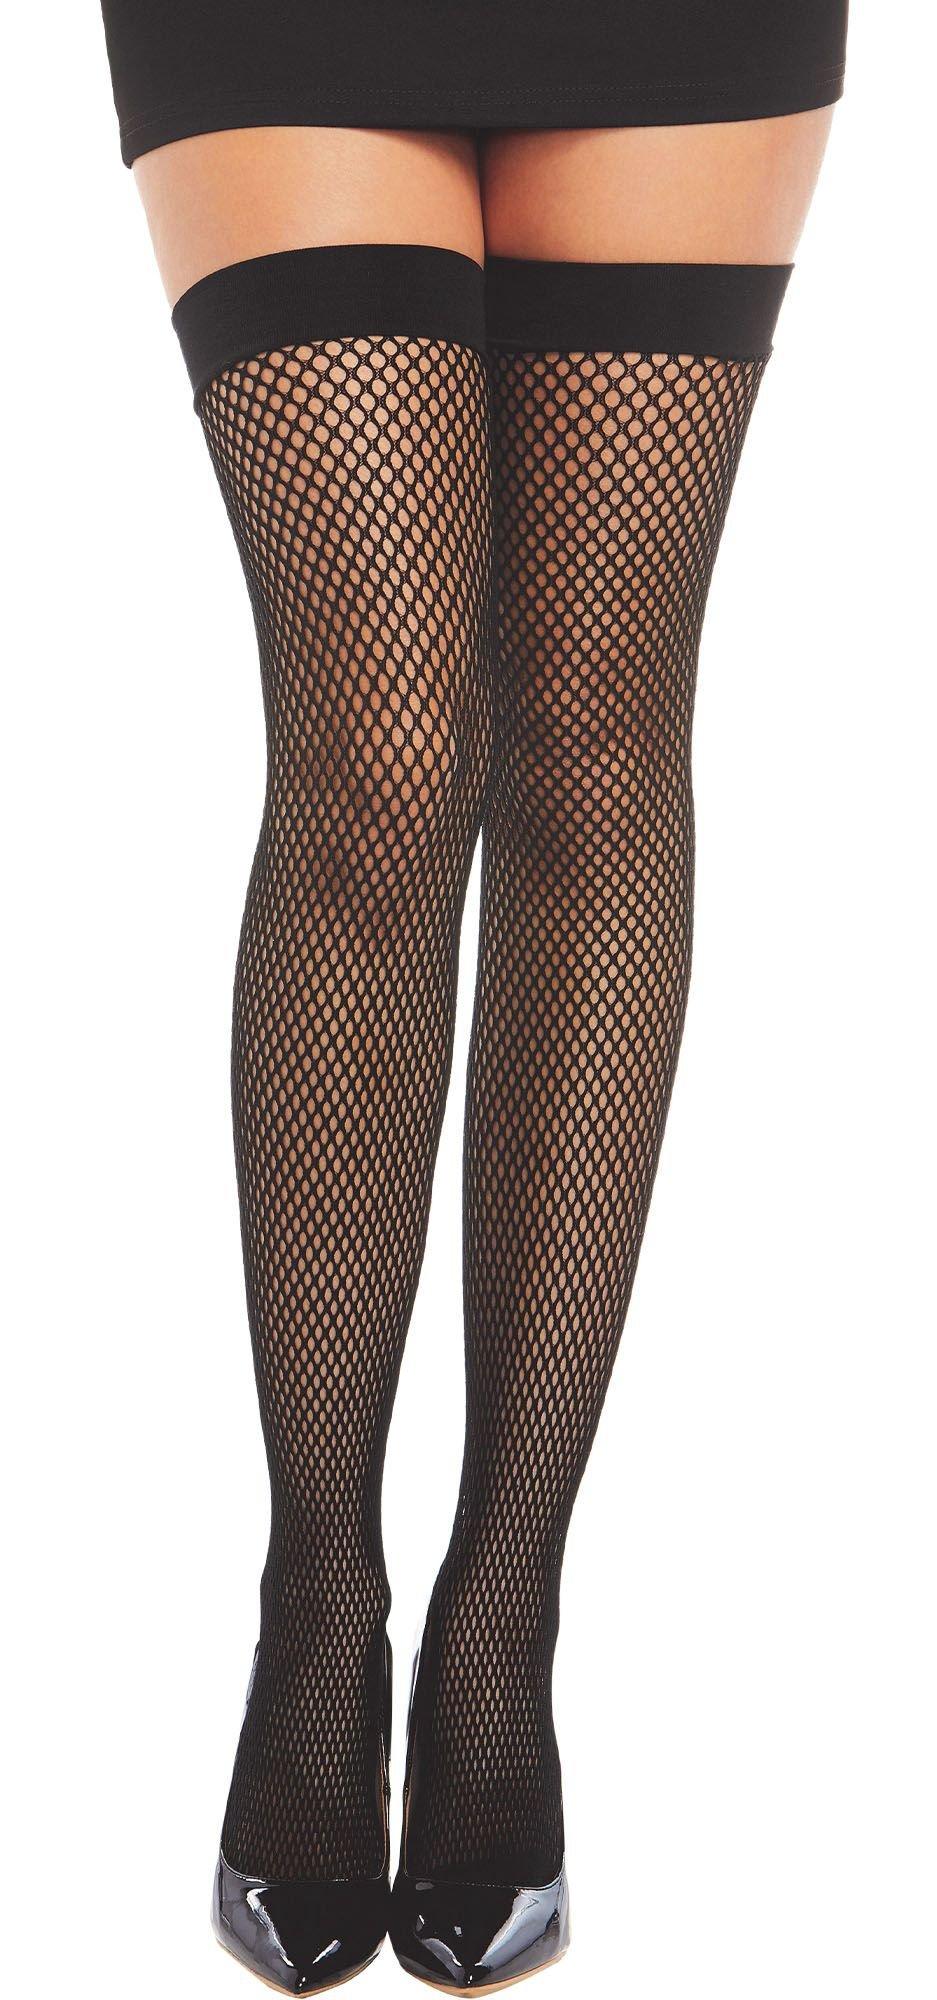 Black Diamond Fishnet Stockings for Adults with Bow Backseam